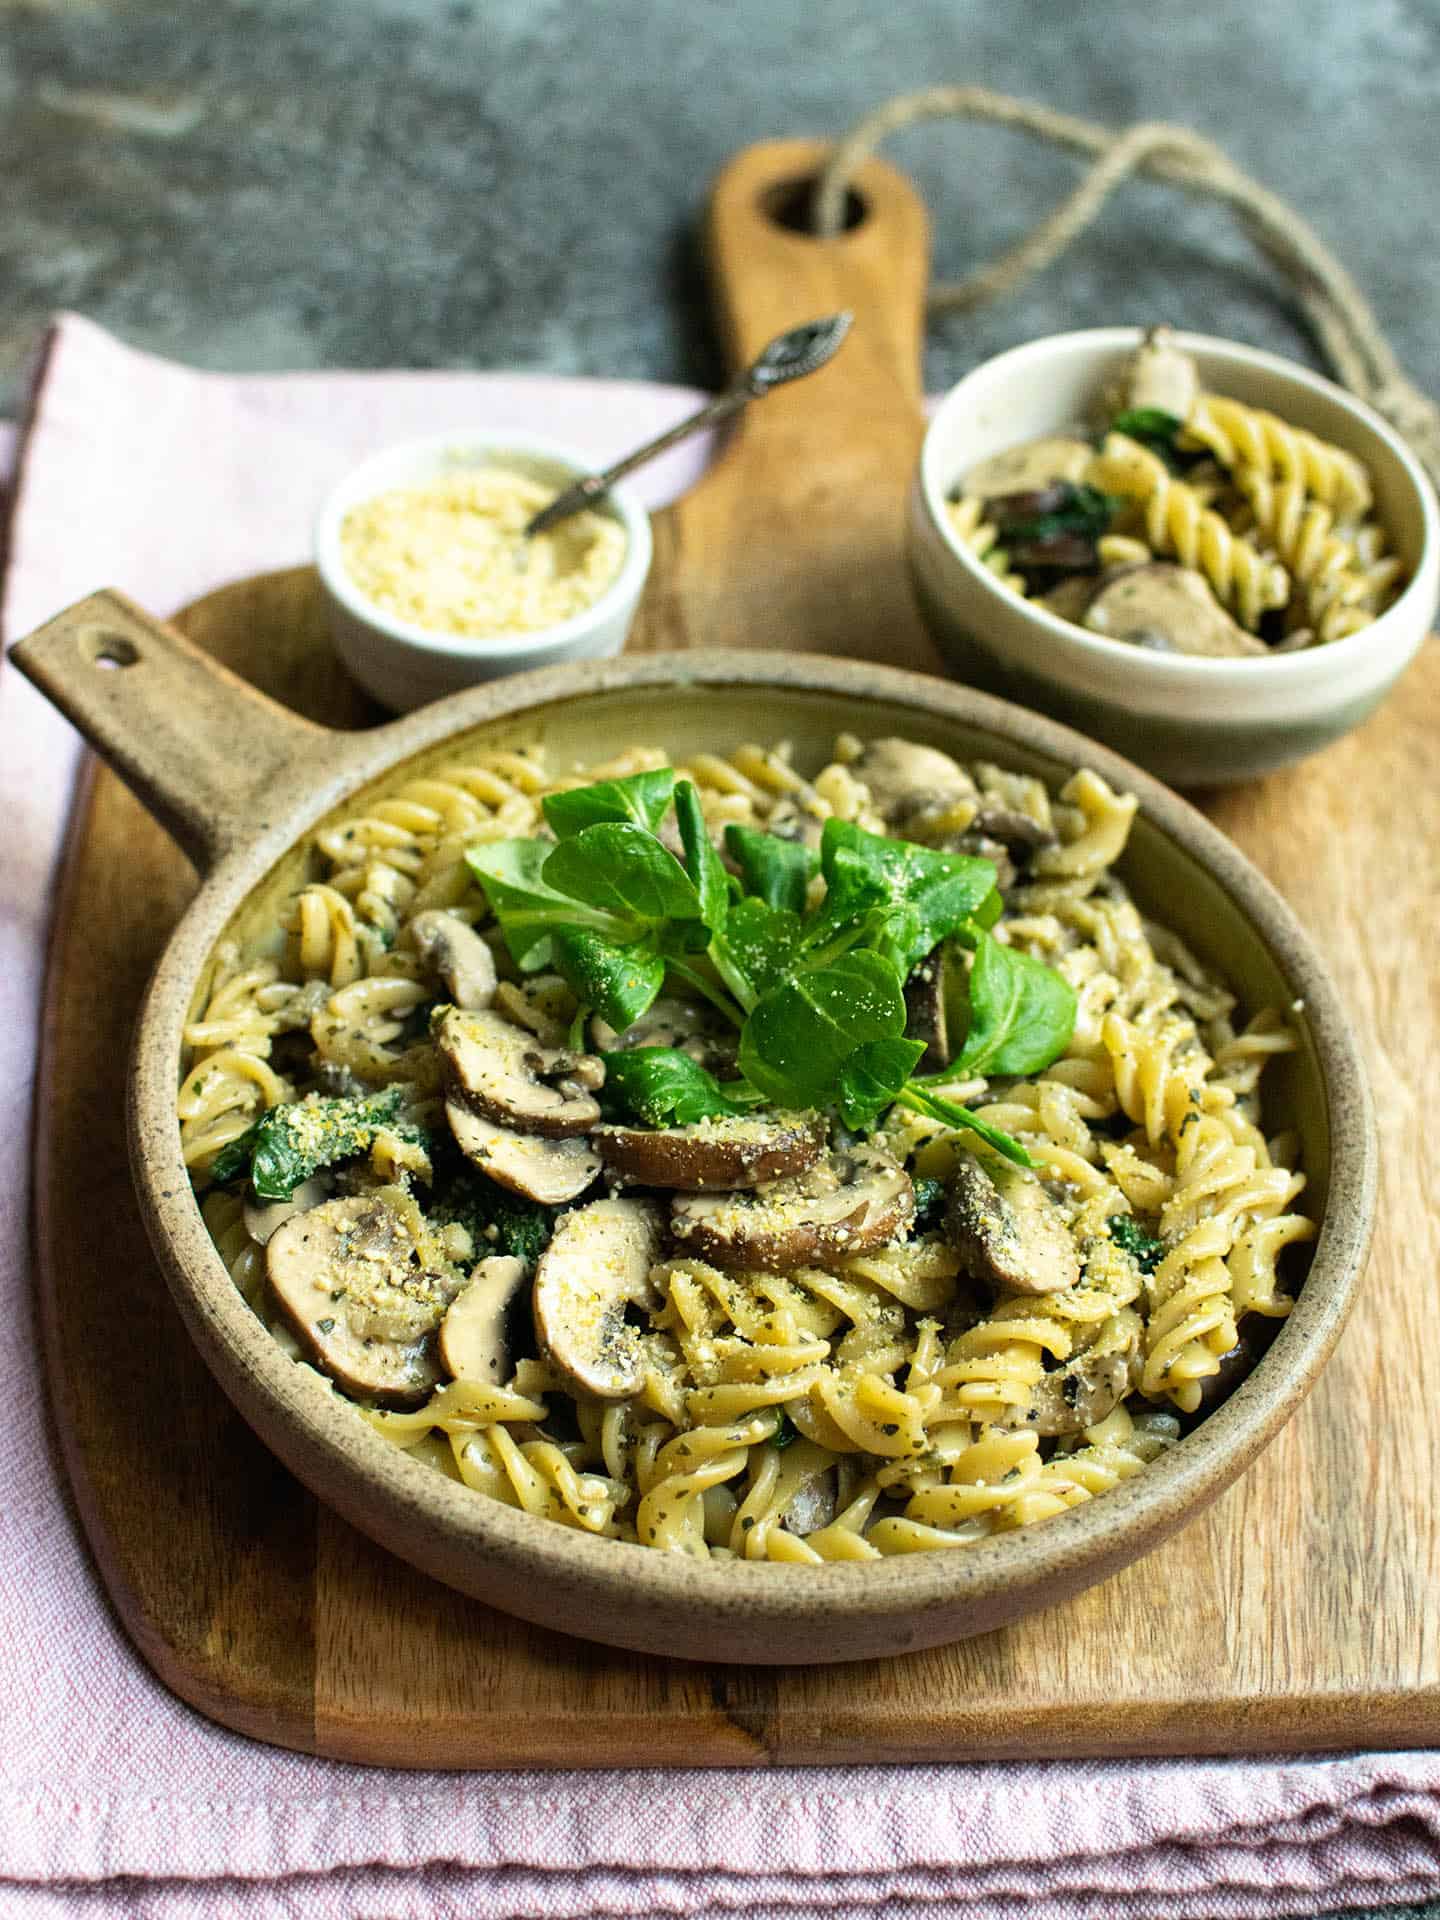 Creamy pasta served up in an earthy bowl, topped with mushrooms.